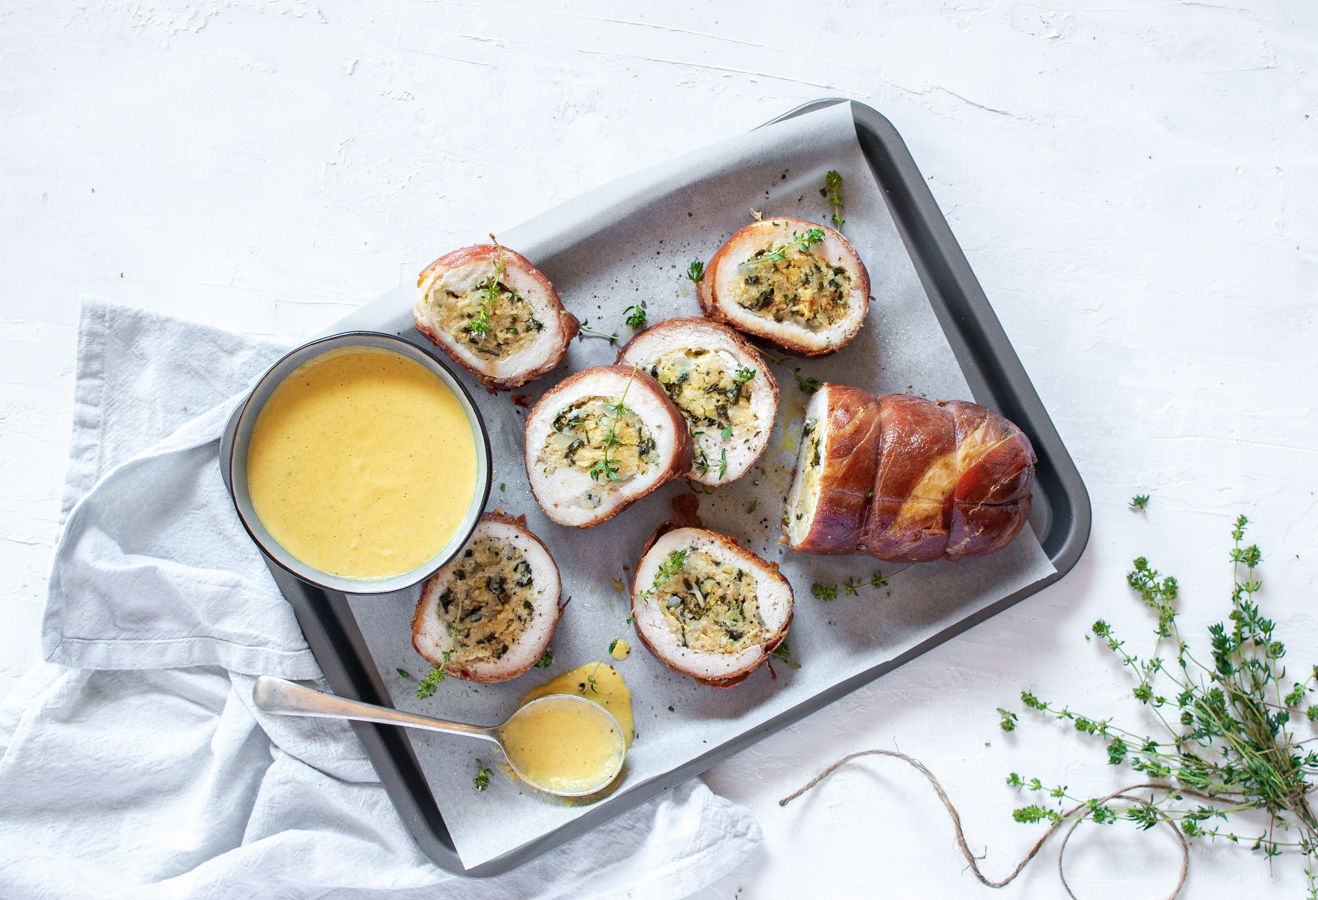 CHICKEN + PROSCIUTTO ROULADE WITH SWEET CORN PUREE